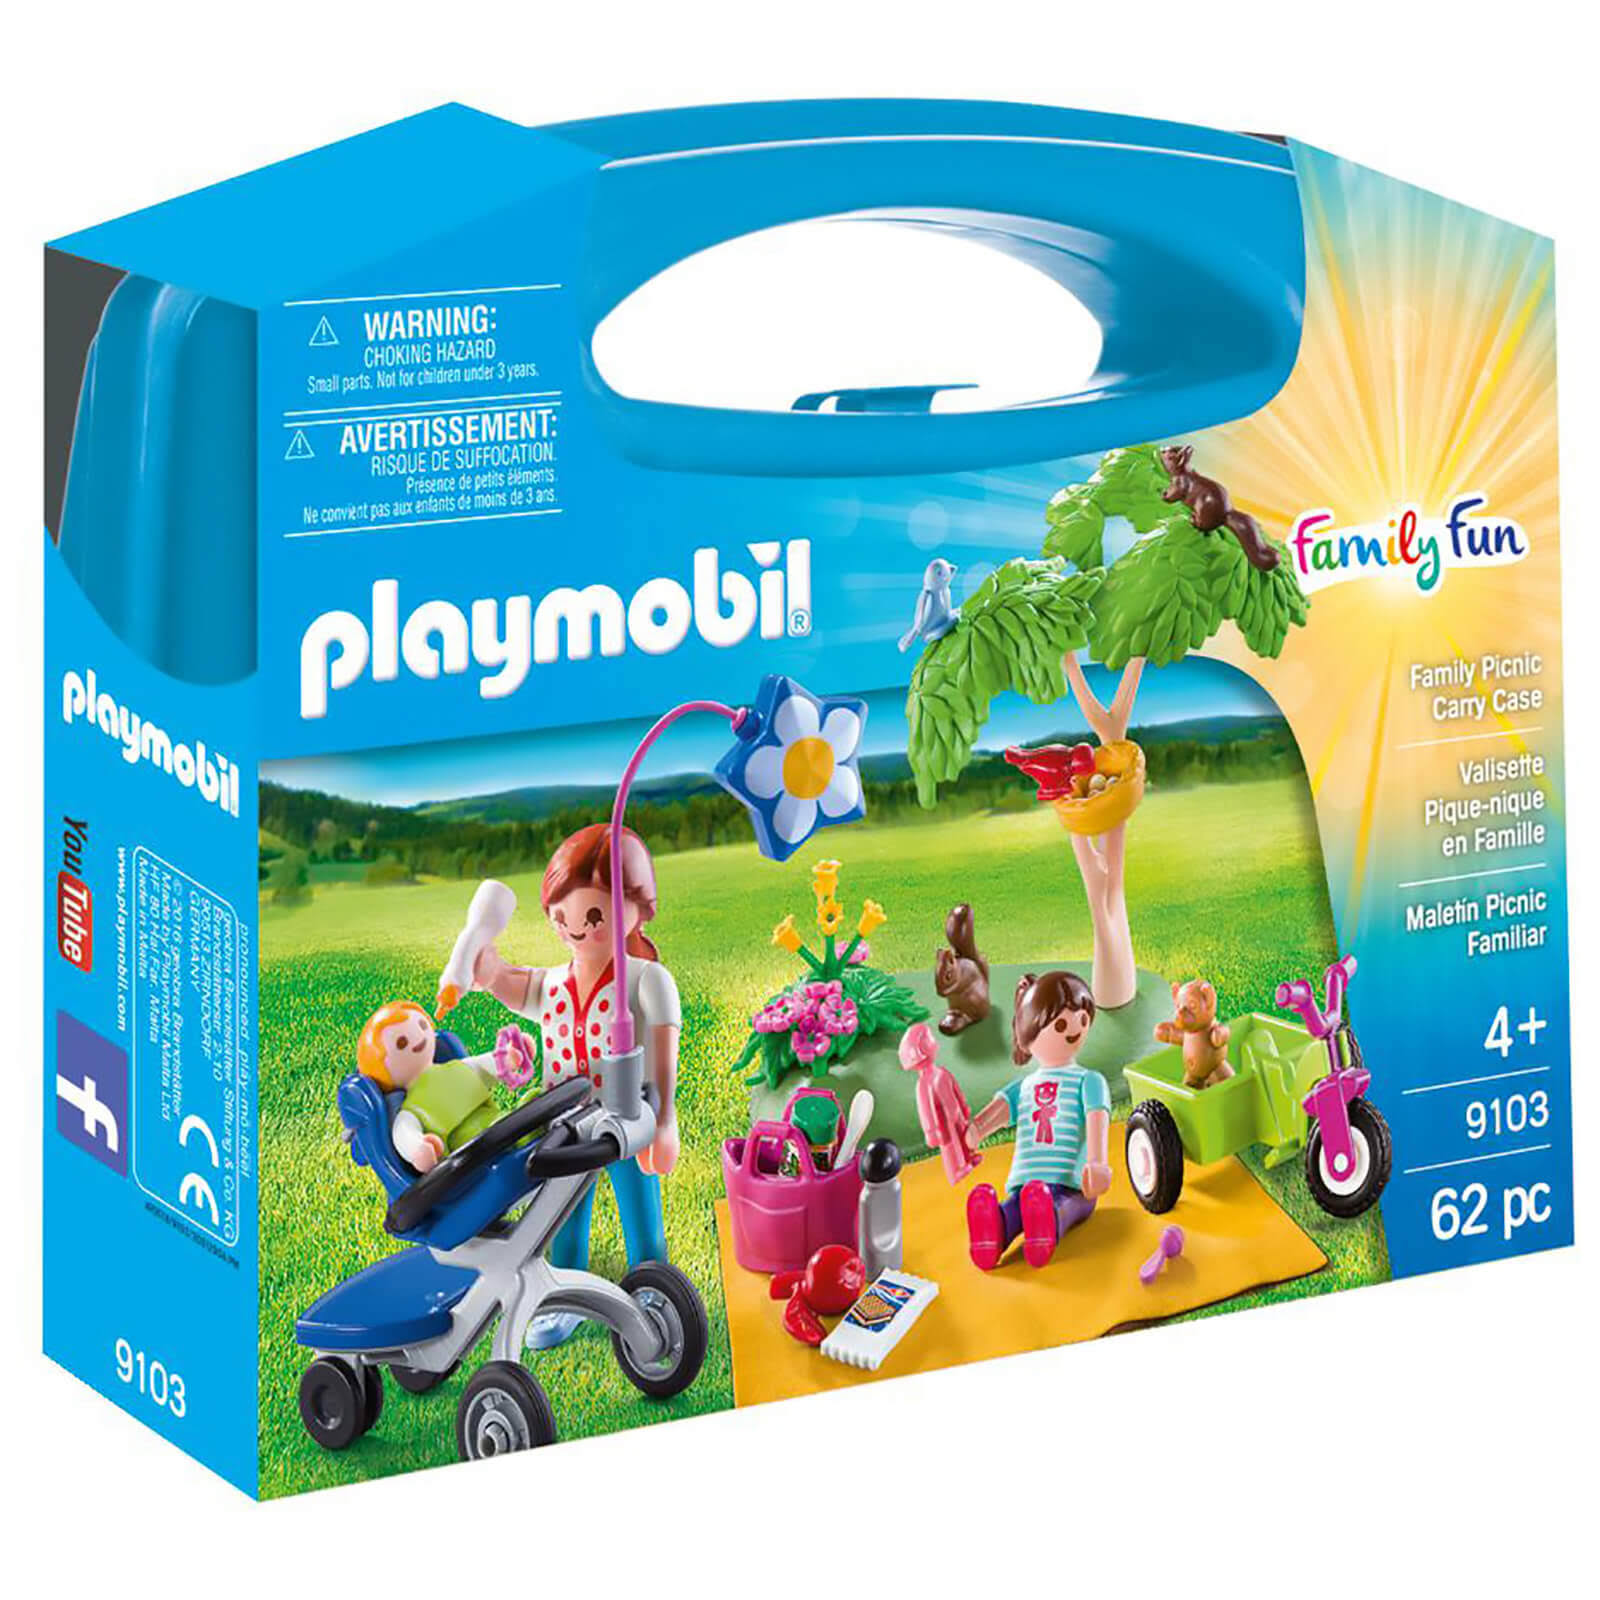 Playmobil Family Picnic Carry Case - 9103